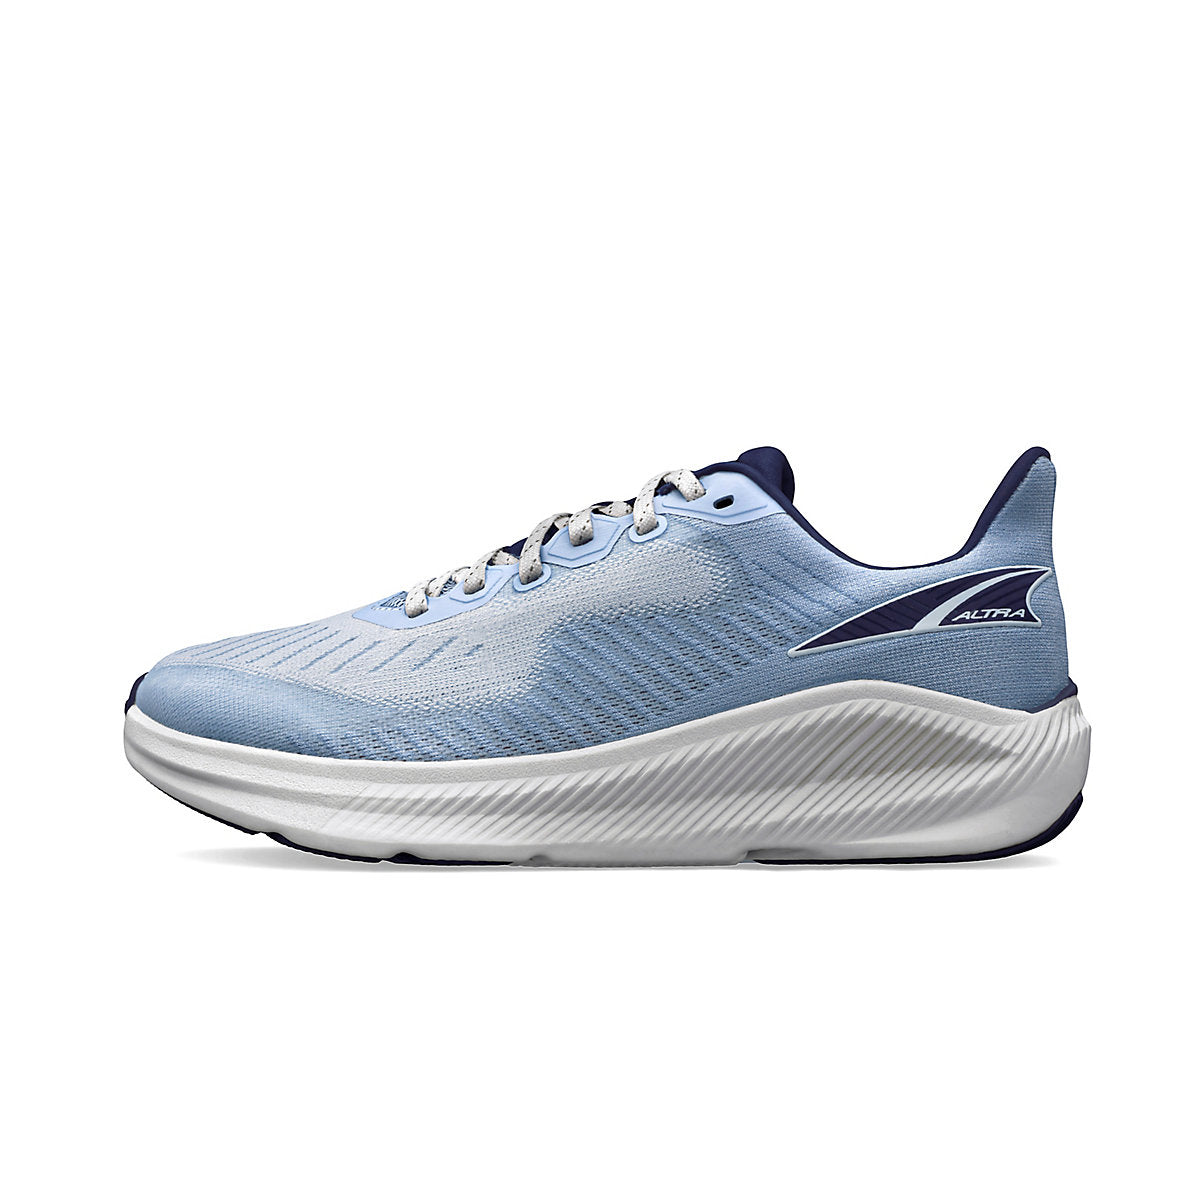 Altra, Experience Form, Women's, Blue\Gray